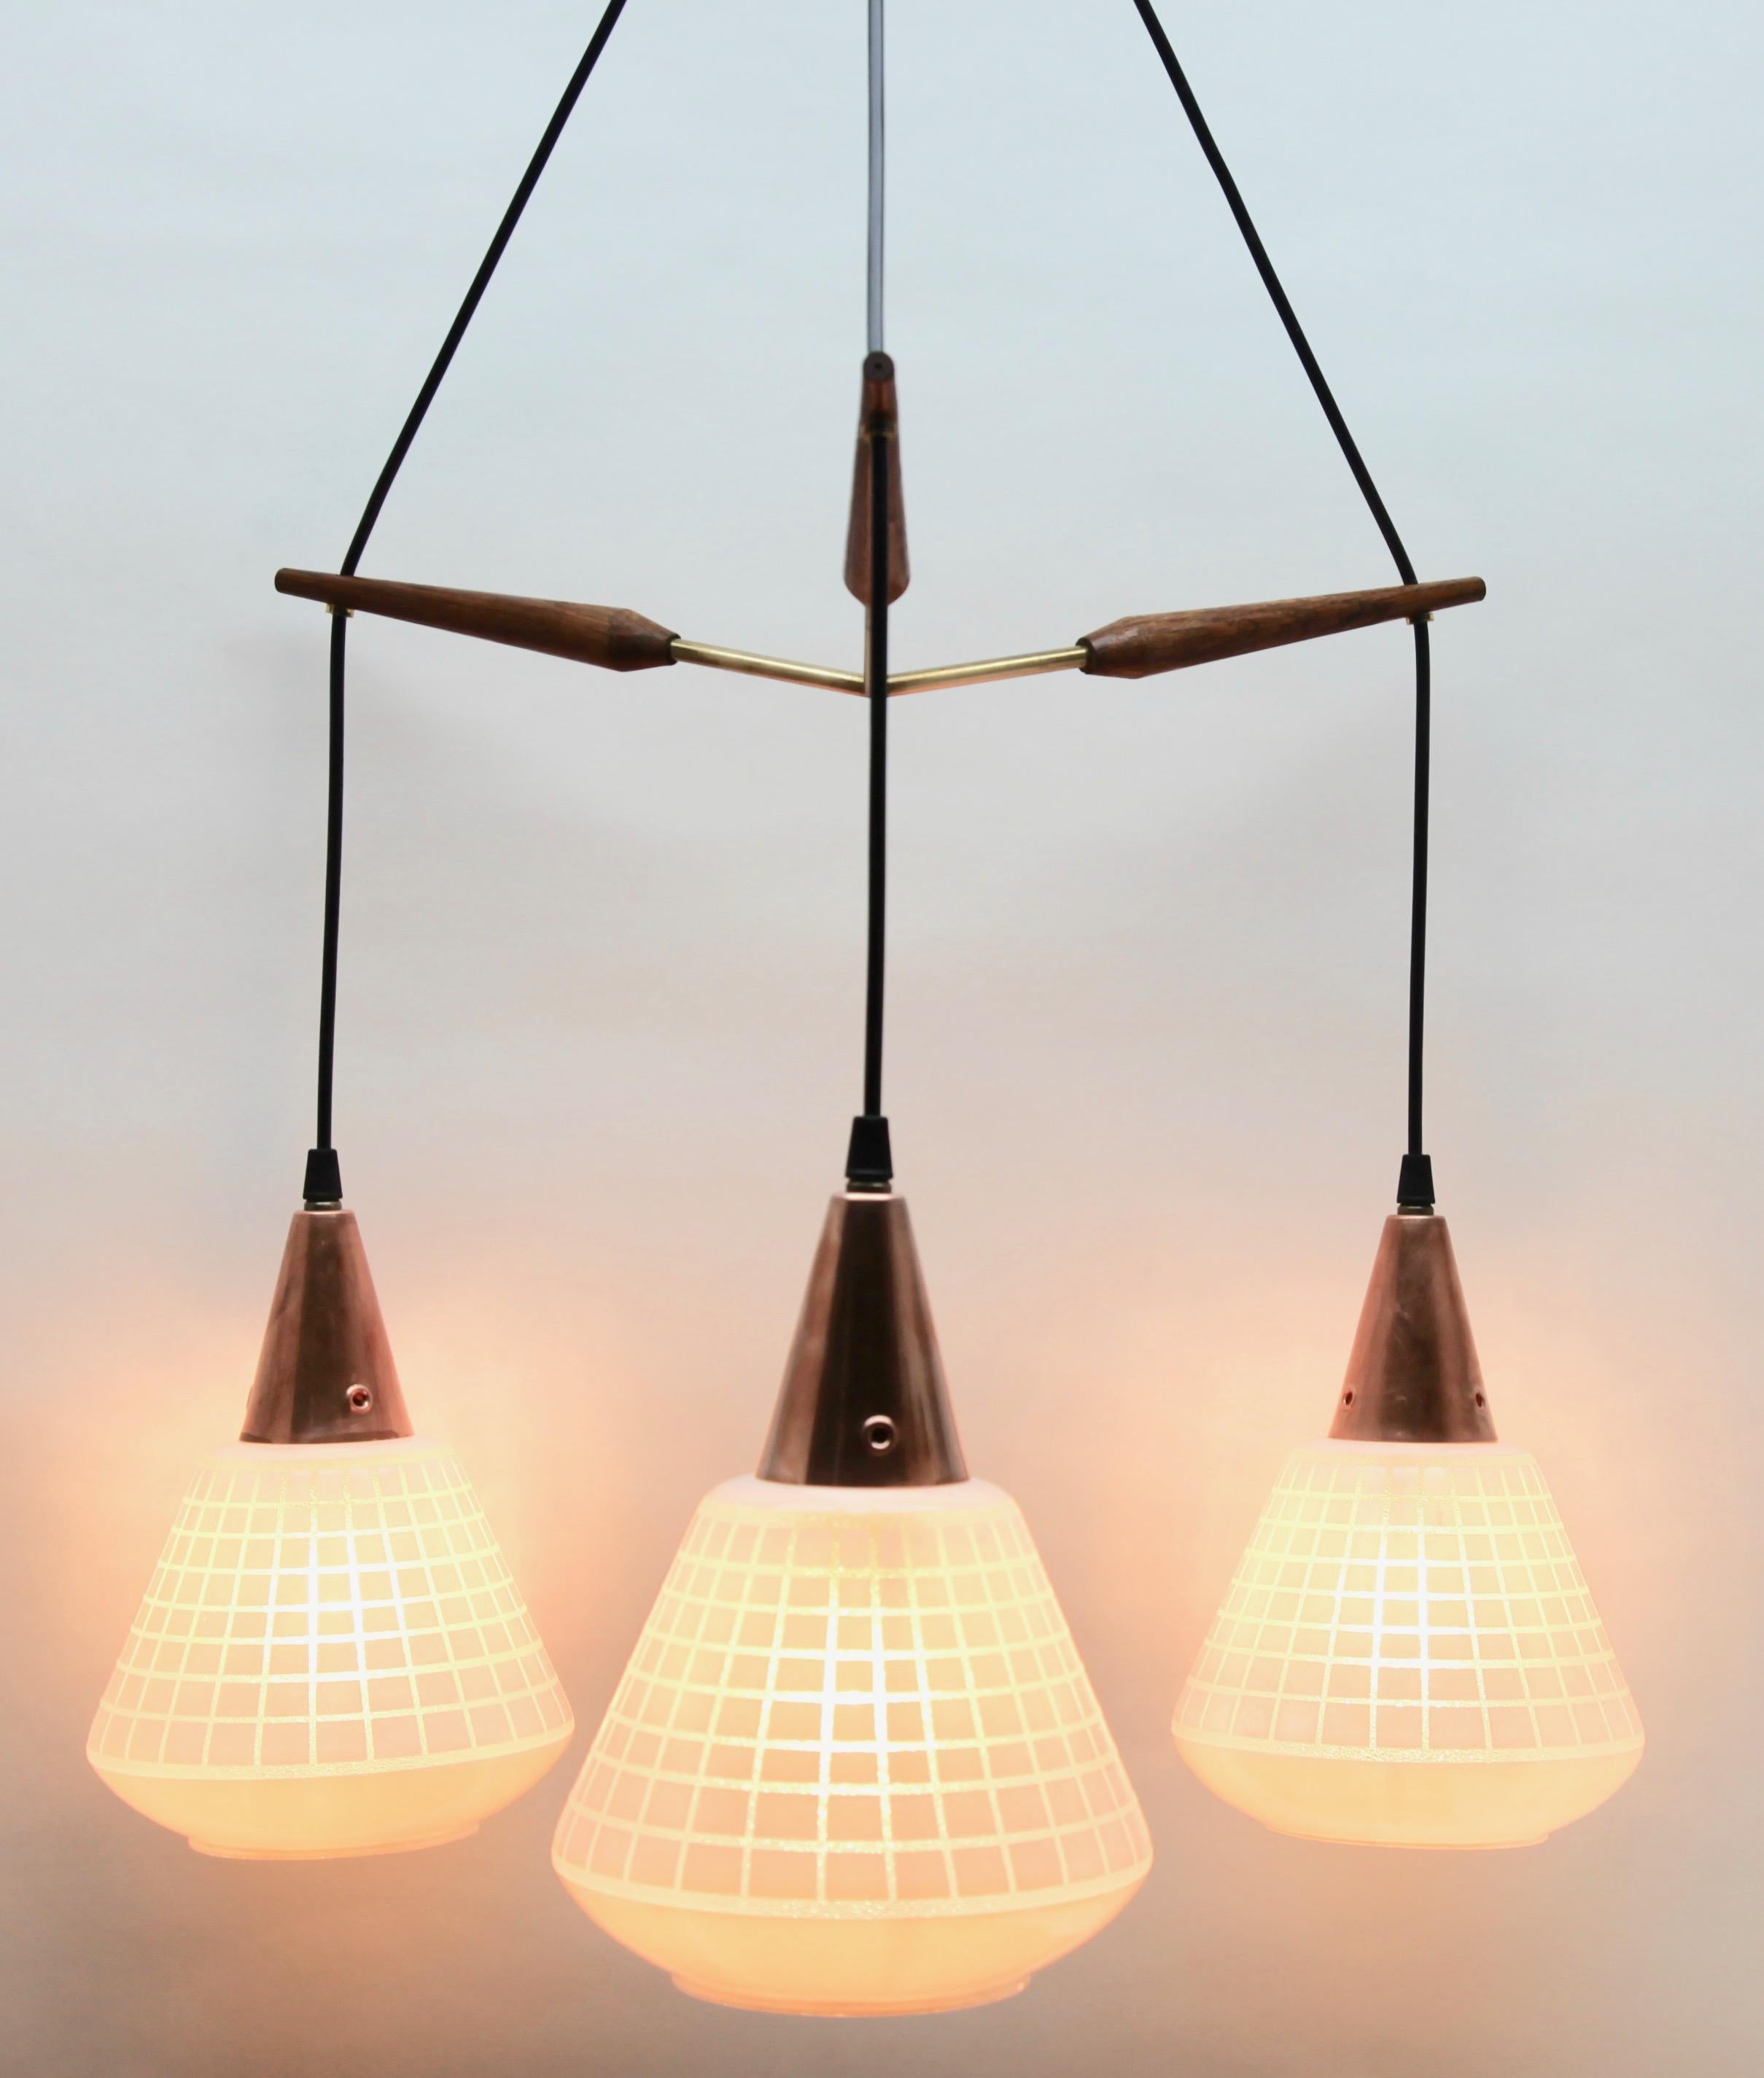 Hanging pendant lights from the late 1950s on an adjustable cable, designed in the Scandinavian style with teak wood and a frosted, light-shade with grid pattern motief
Its Classic modernist form and simplicity in design, making it an iconic example